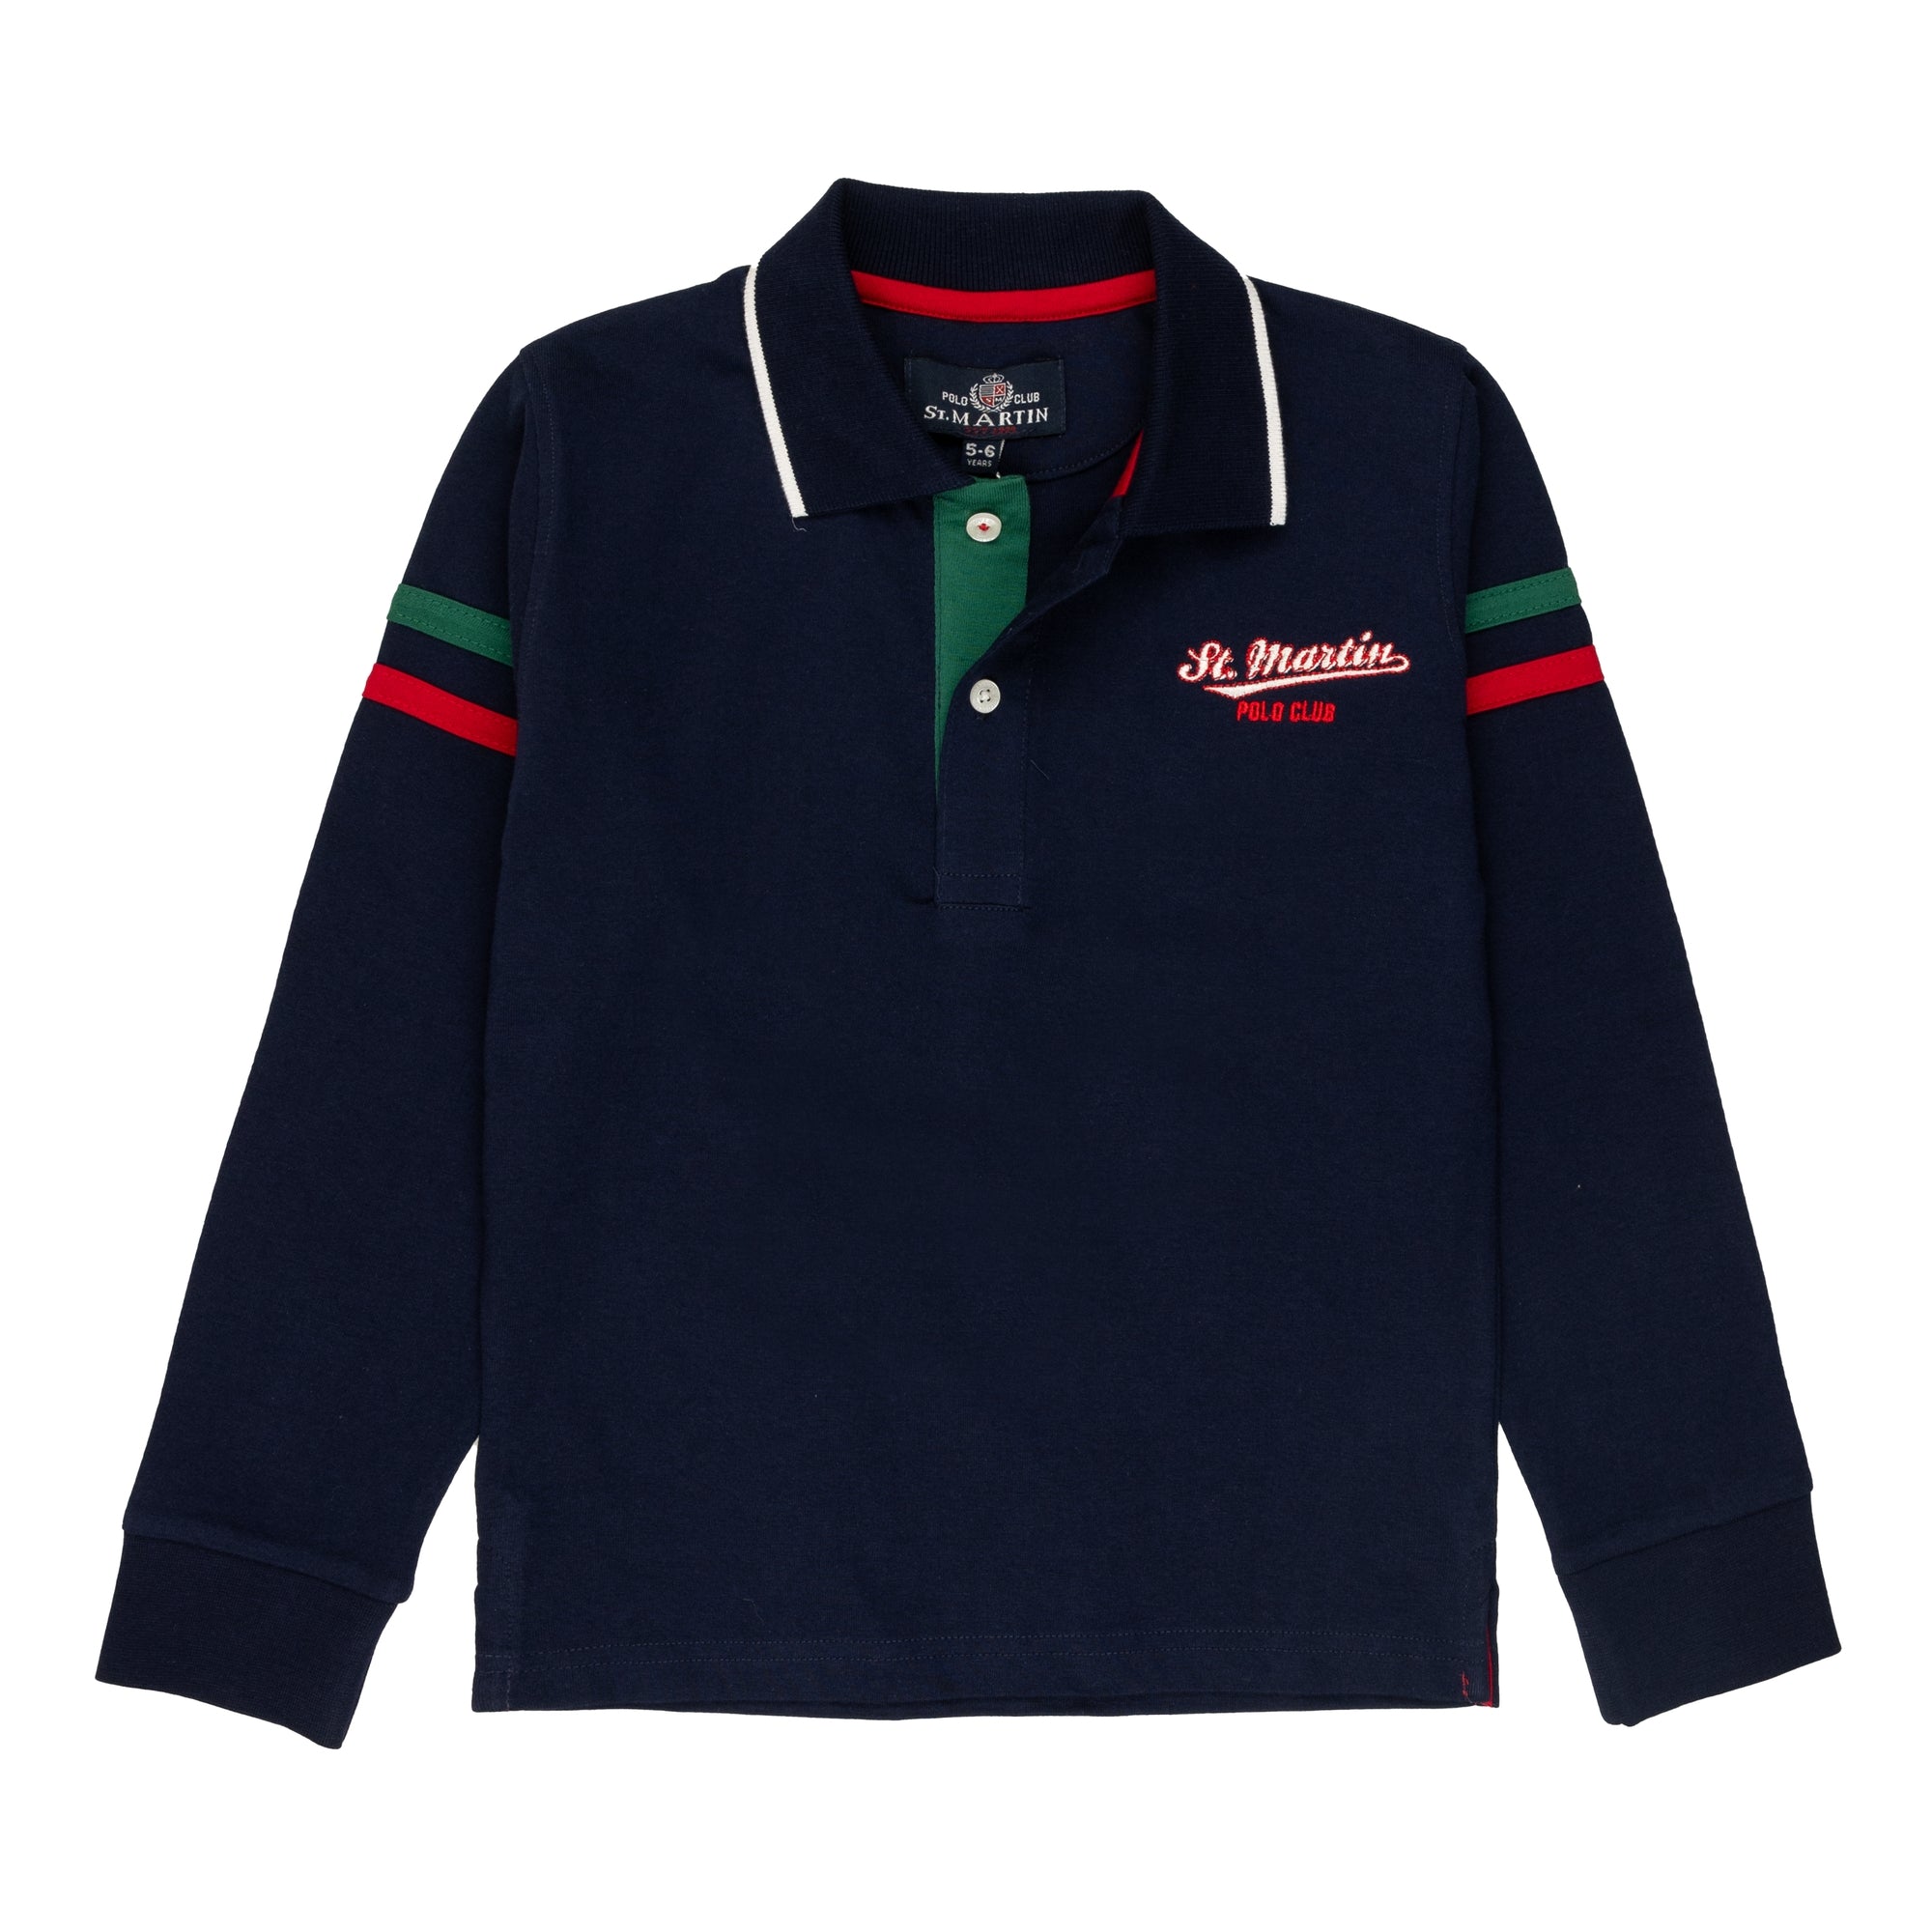 Polo shirt with bands on the sleeves and logo embroidery